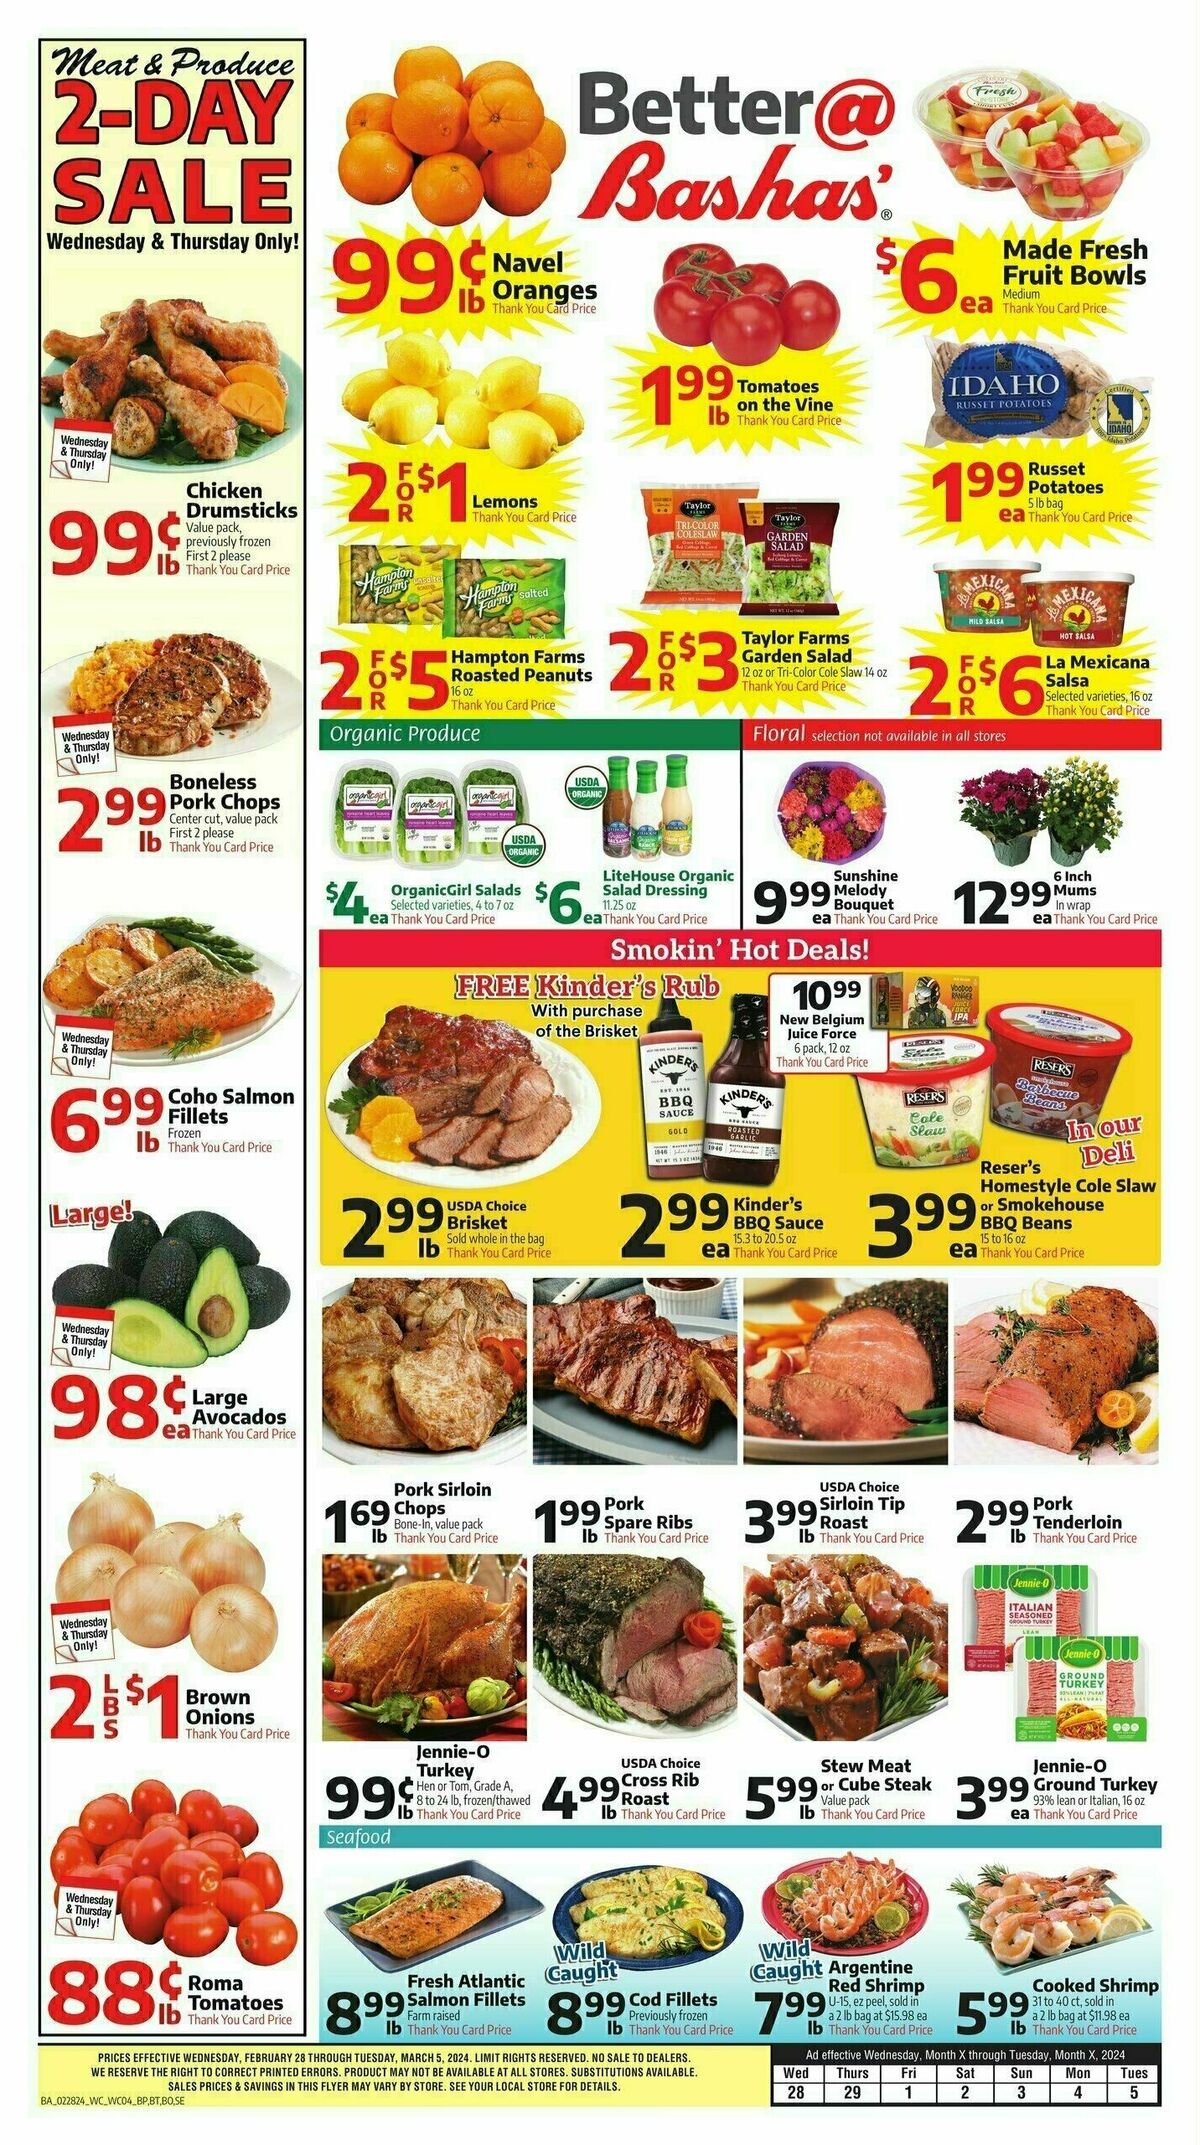 Bashas Weekly Ad from February 28